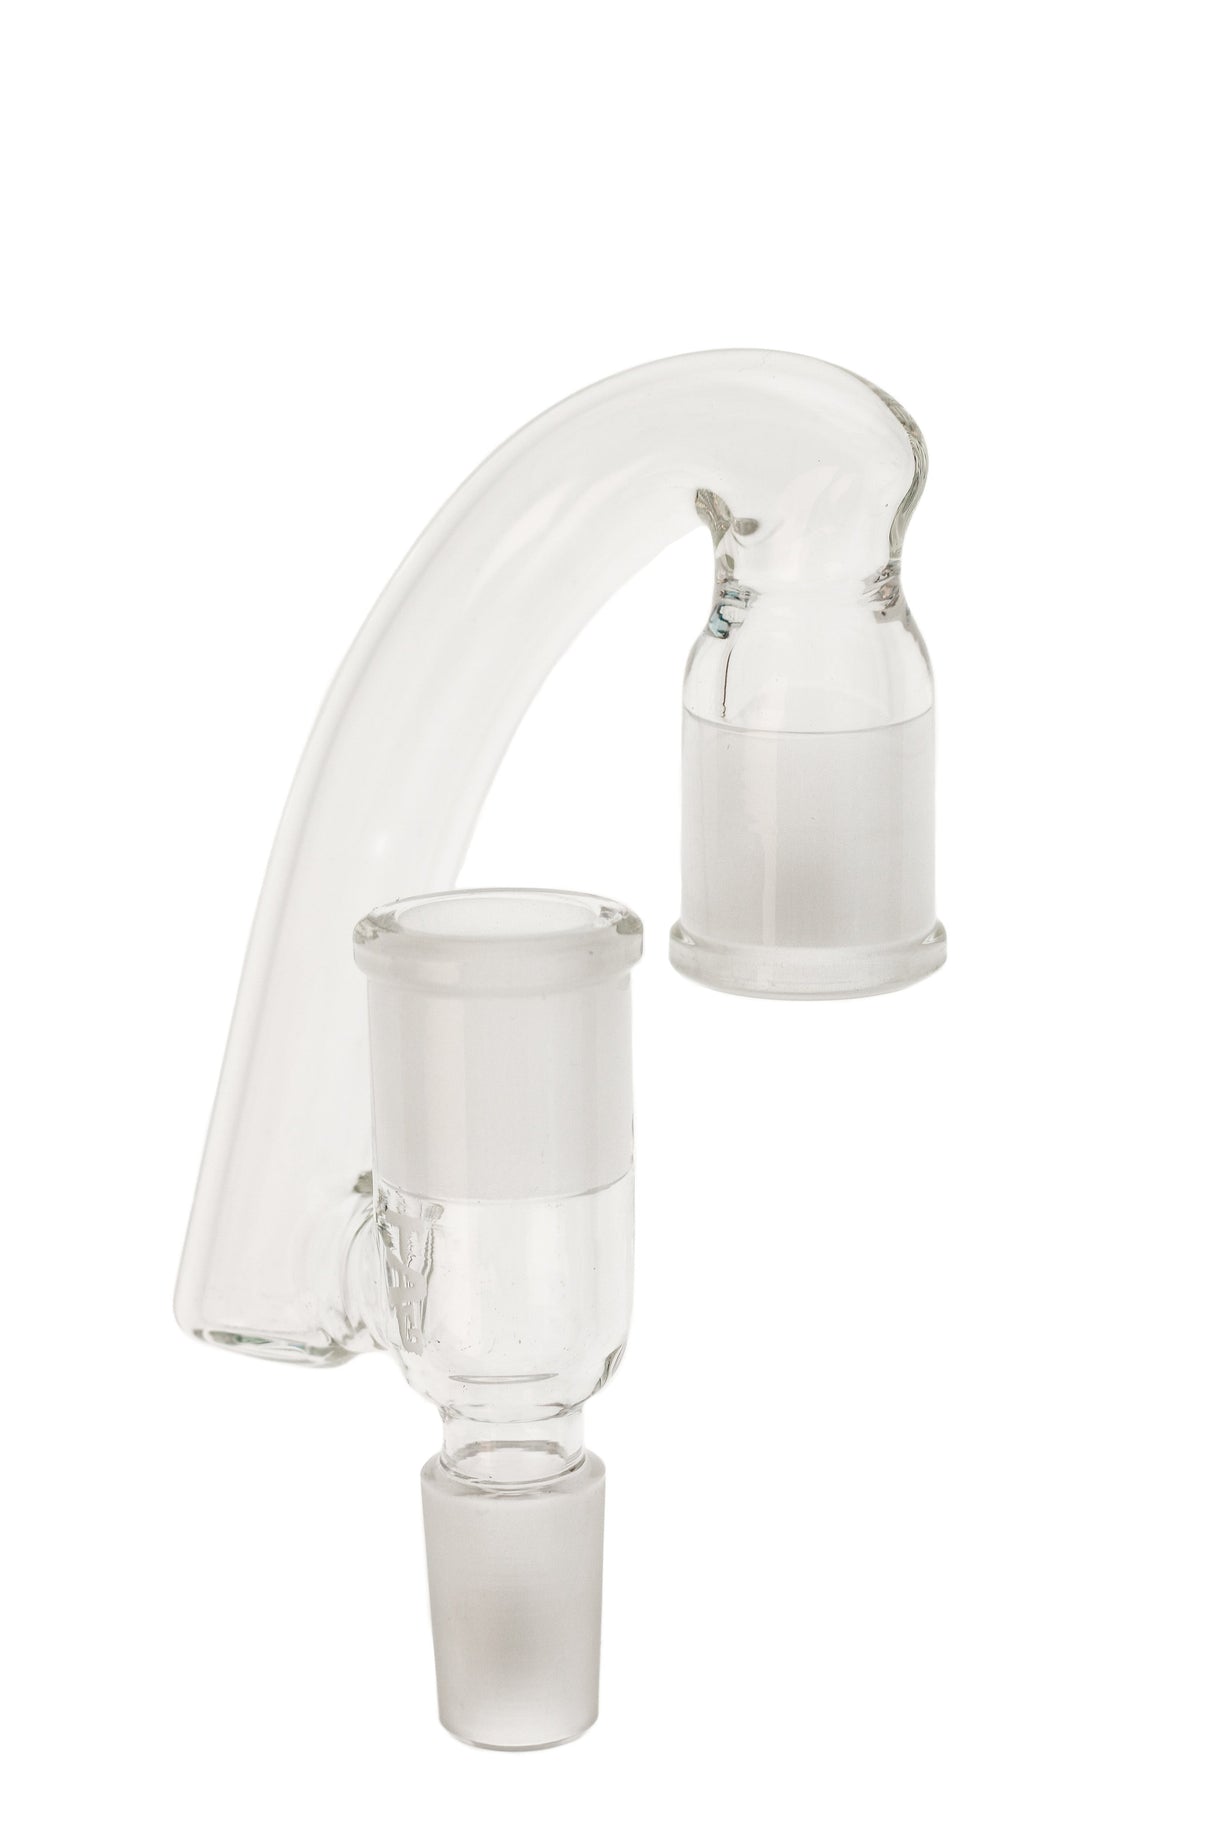 TAG - Reclaim Drop Down Adapter with 0.5" Drop, Male-Female Joint 18mm to 14mm, Clear Glass, Side View